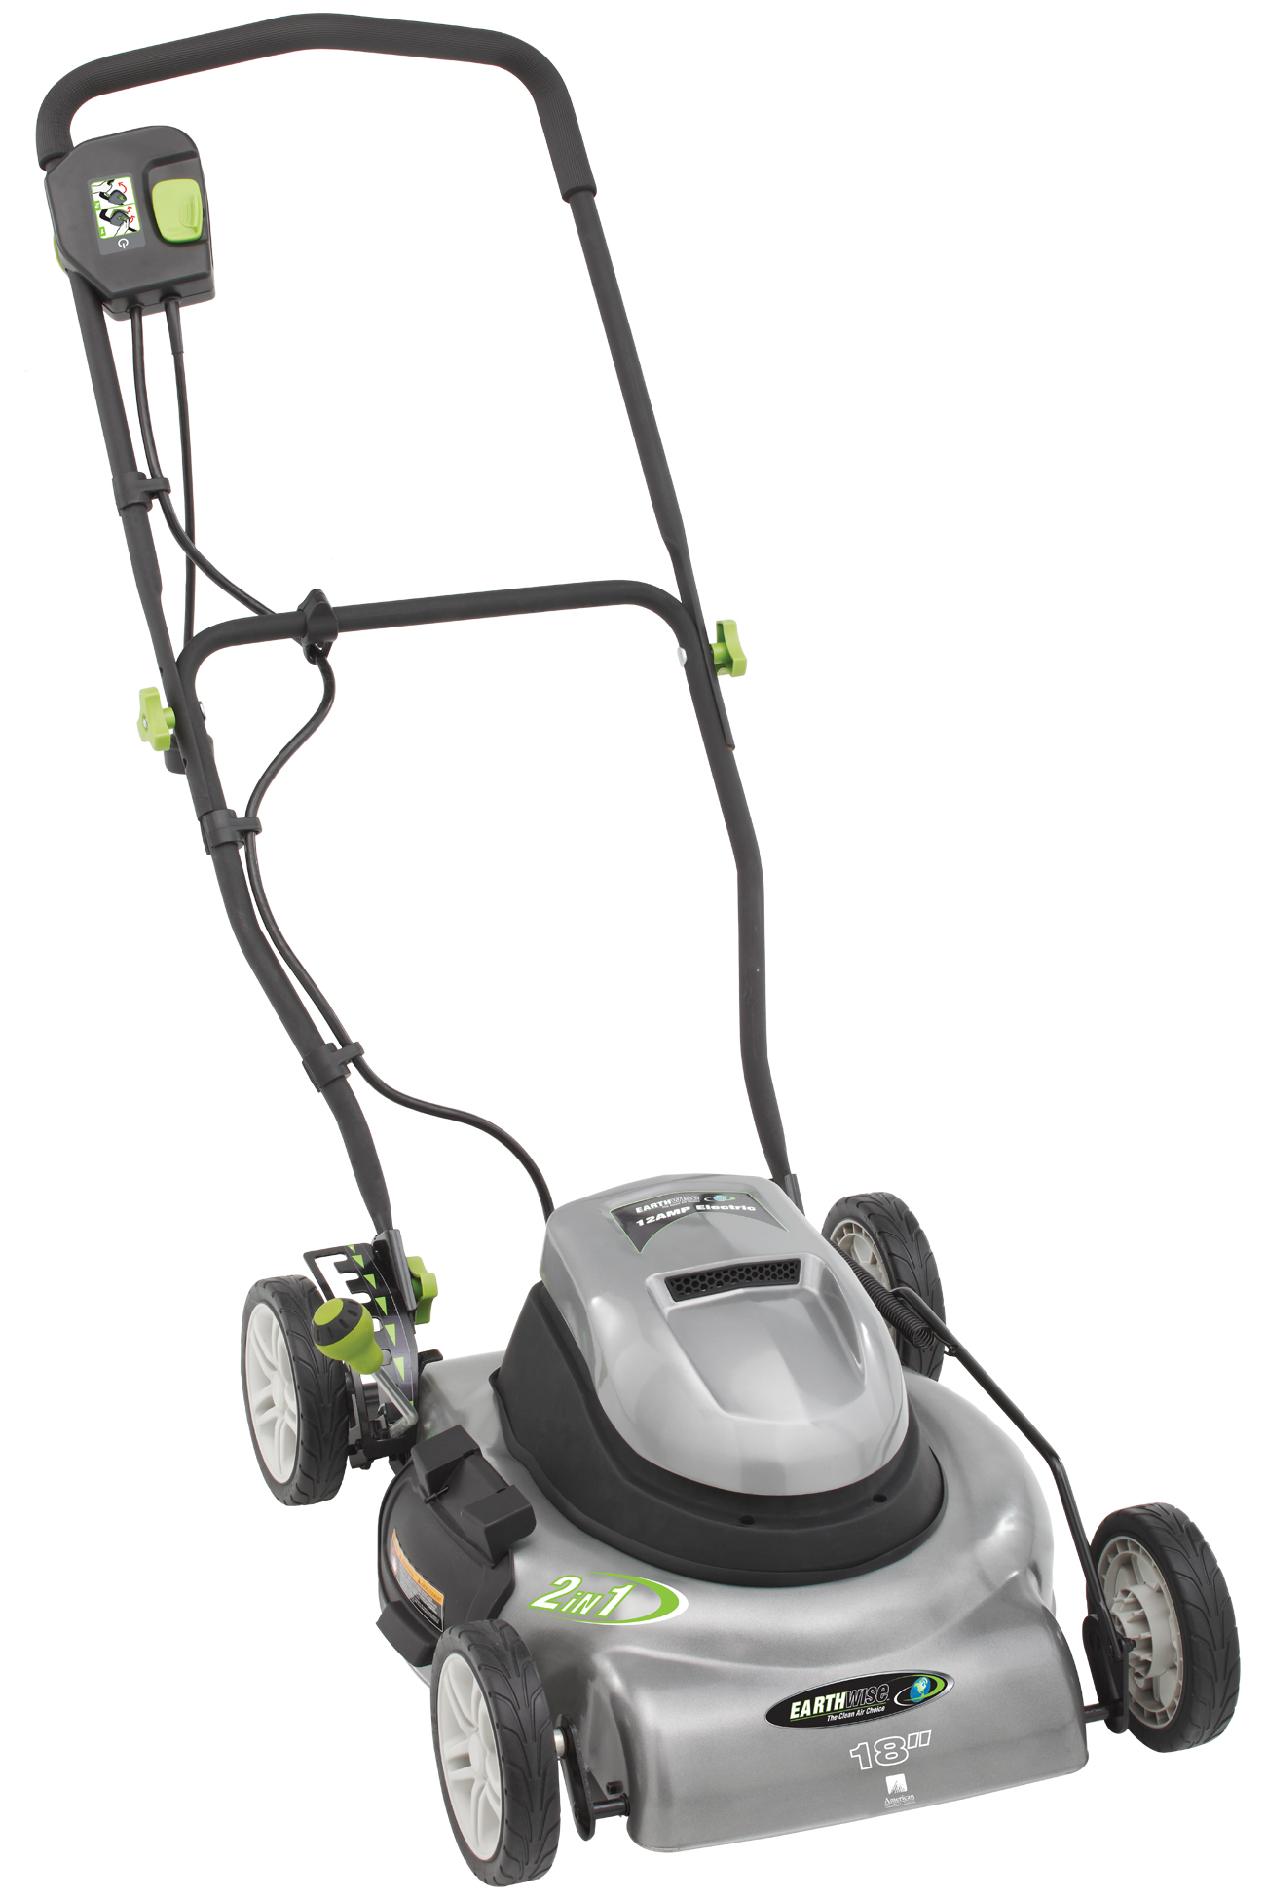 Earthwise 18 Inch Corded Electric 12 Amp Lawn mower